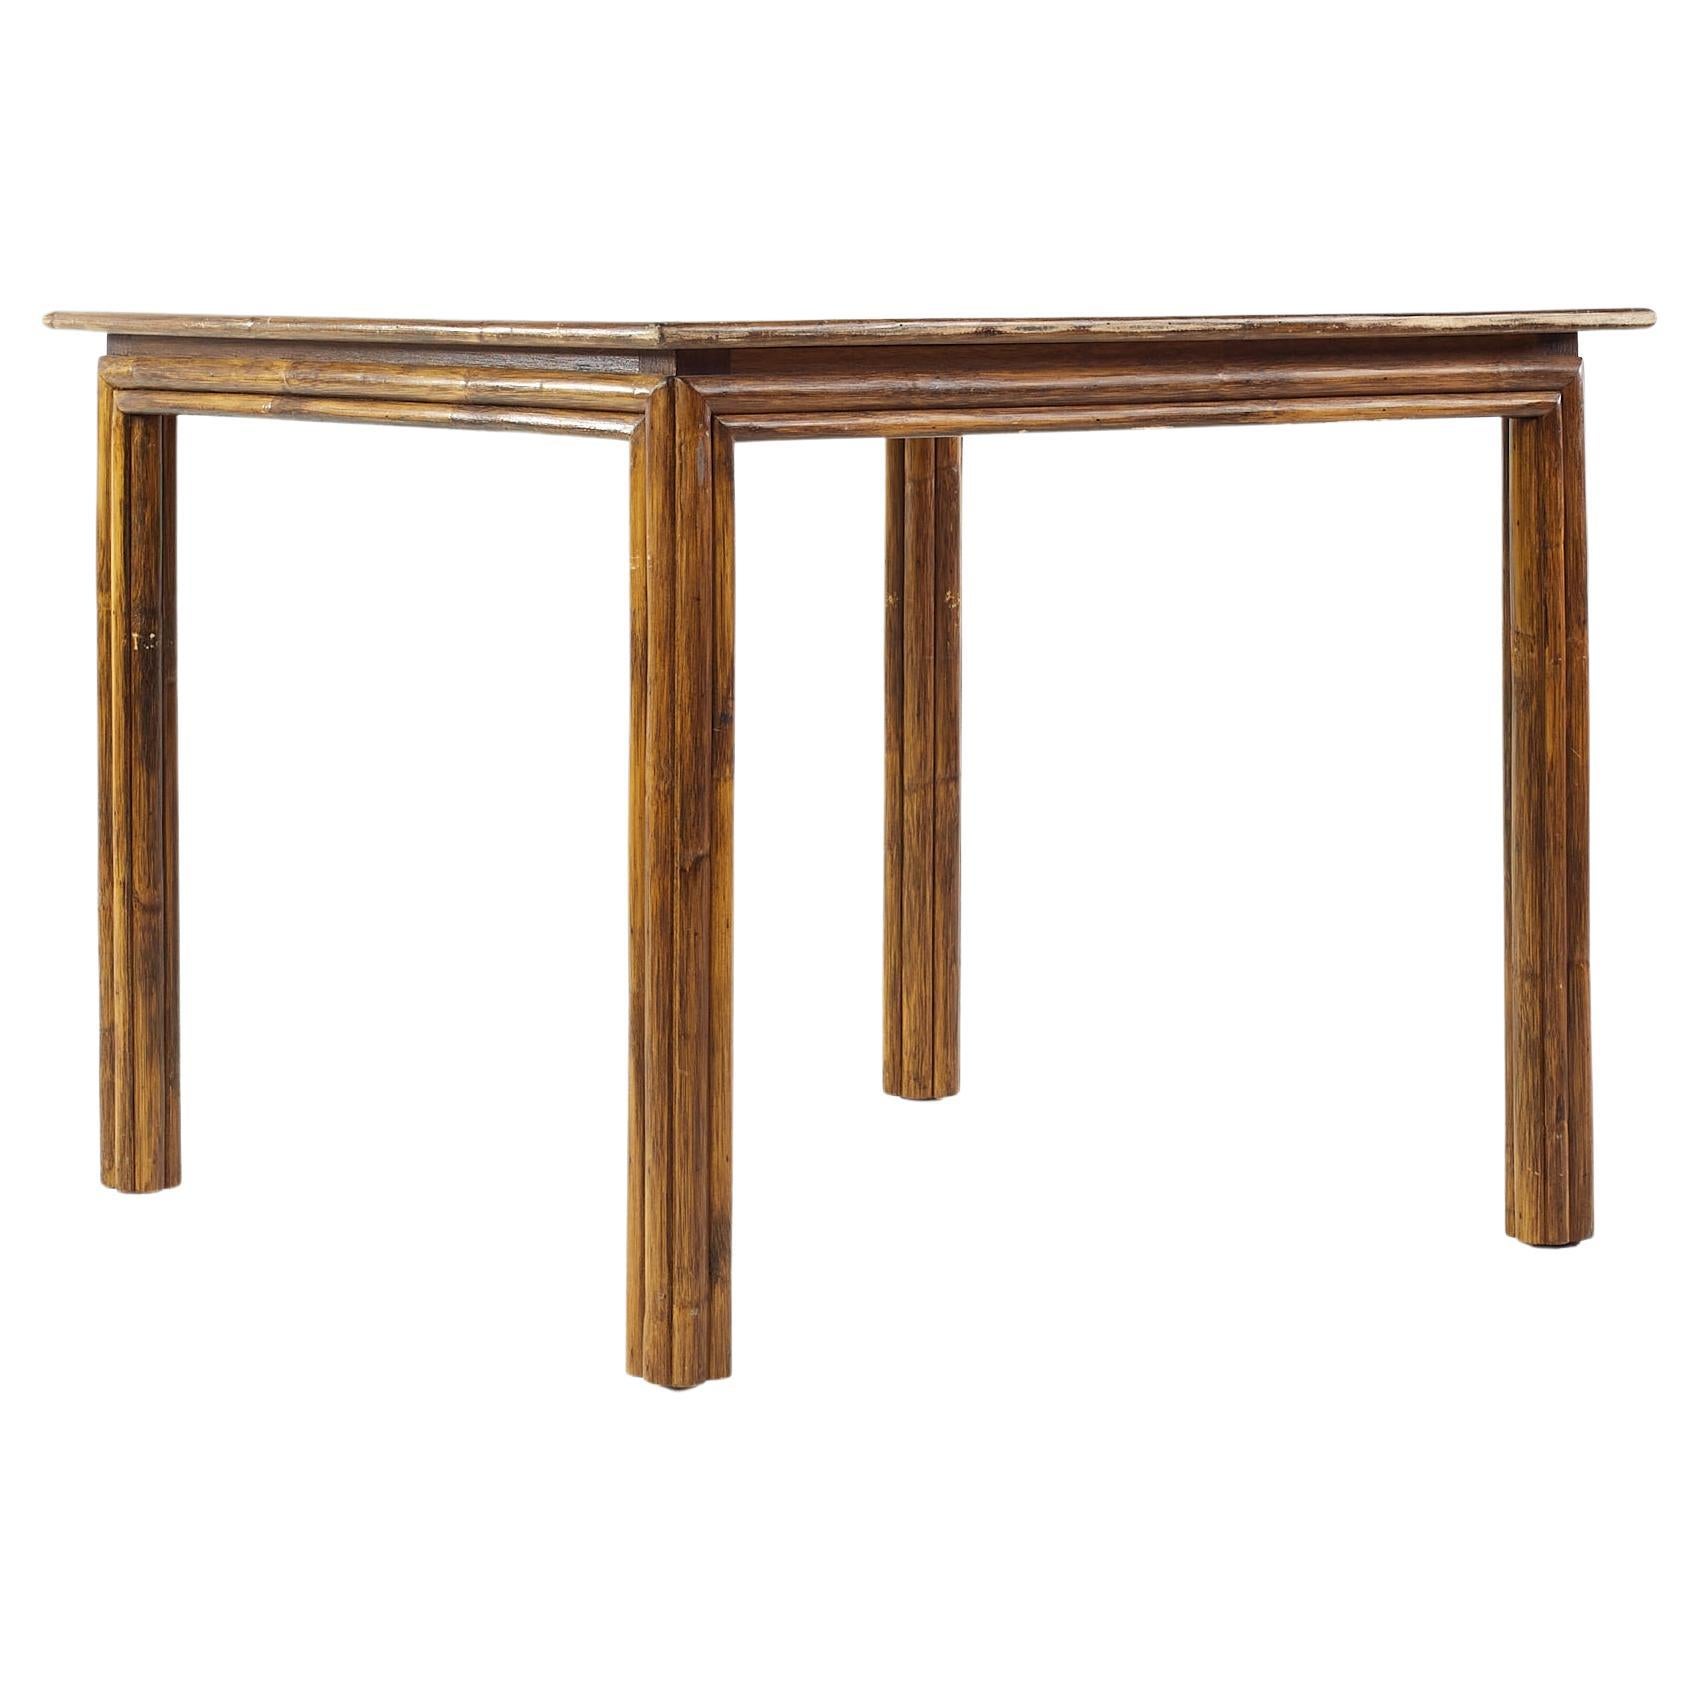 McGuire Mid Century Walnut and Rattan Square Dining Table